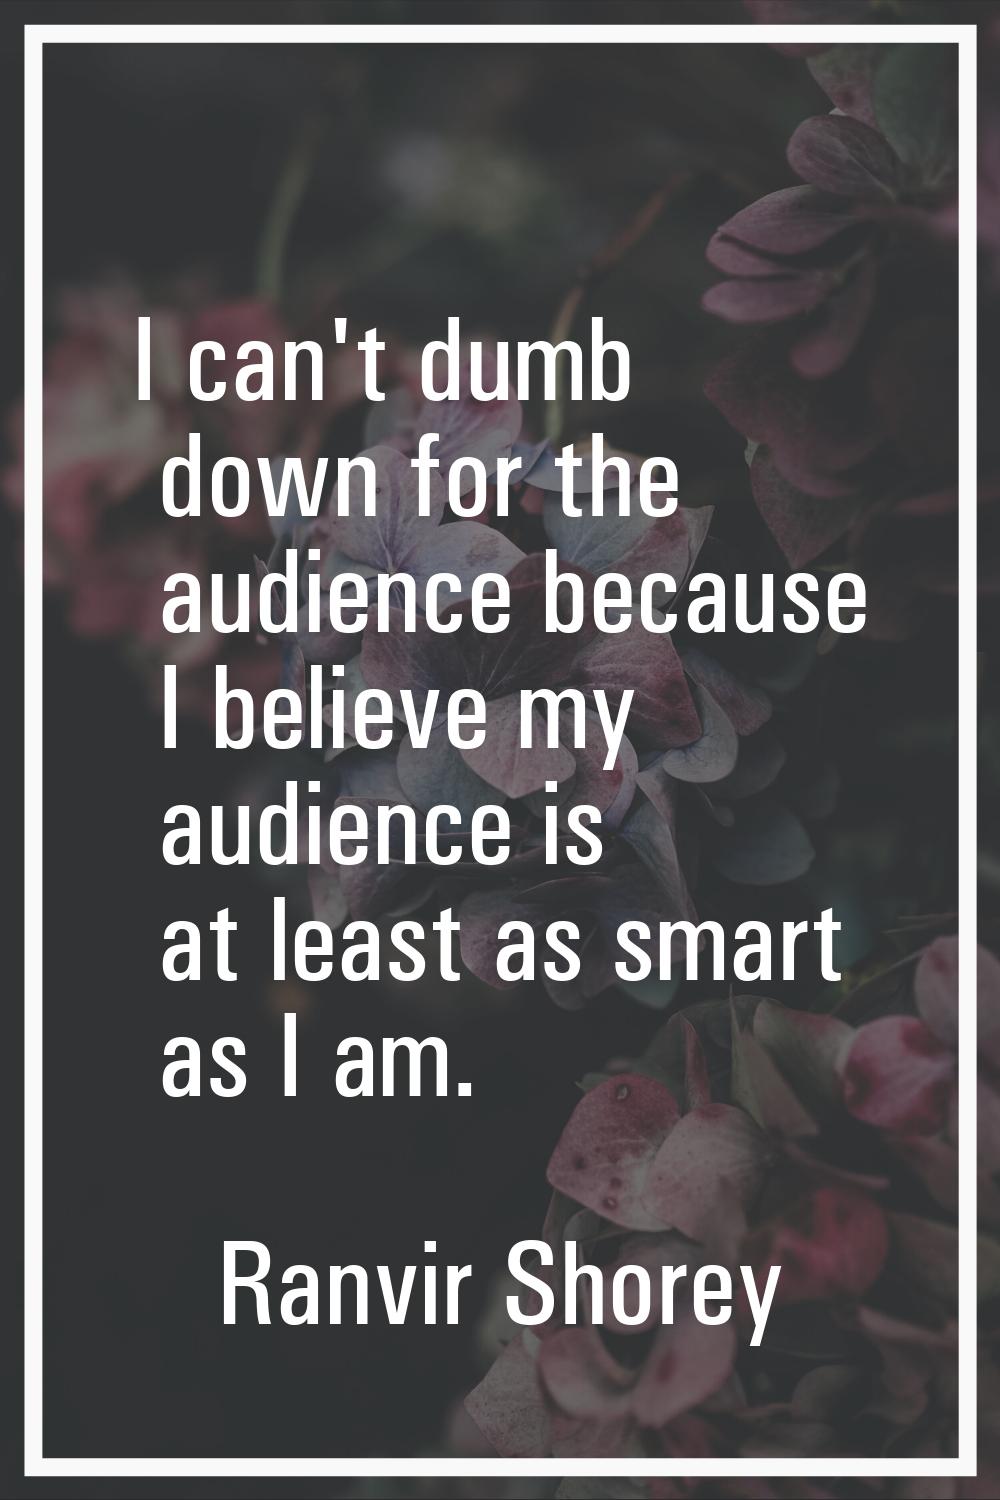 I can't dumb down for the audience because I believe my audience is at least as smart as I am.